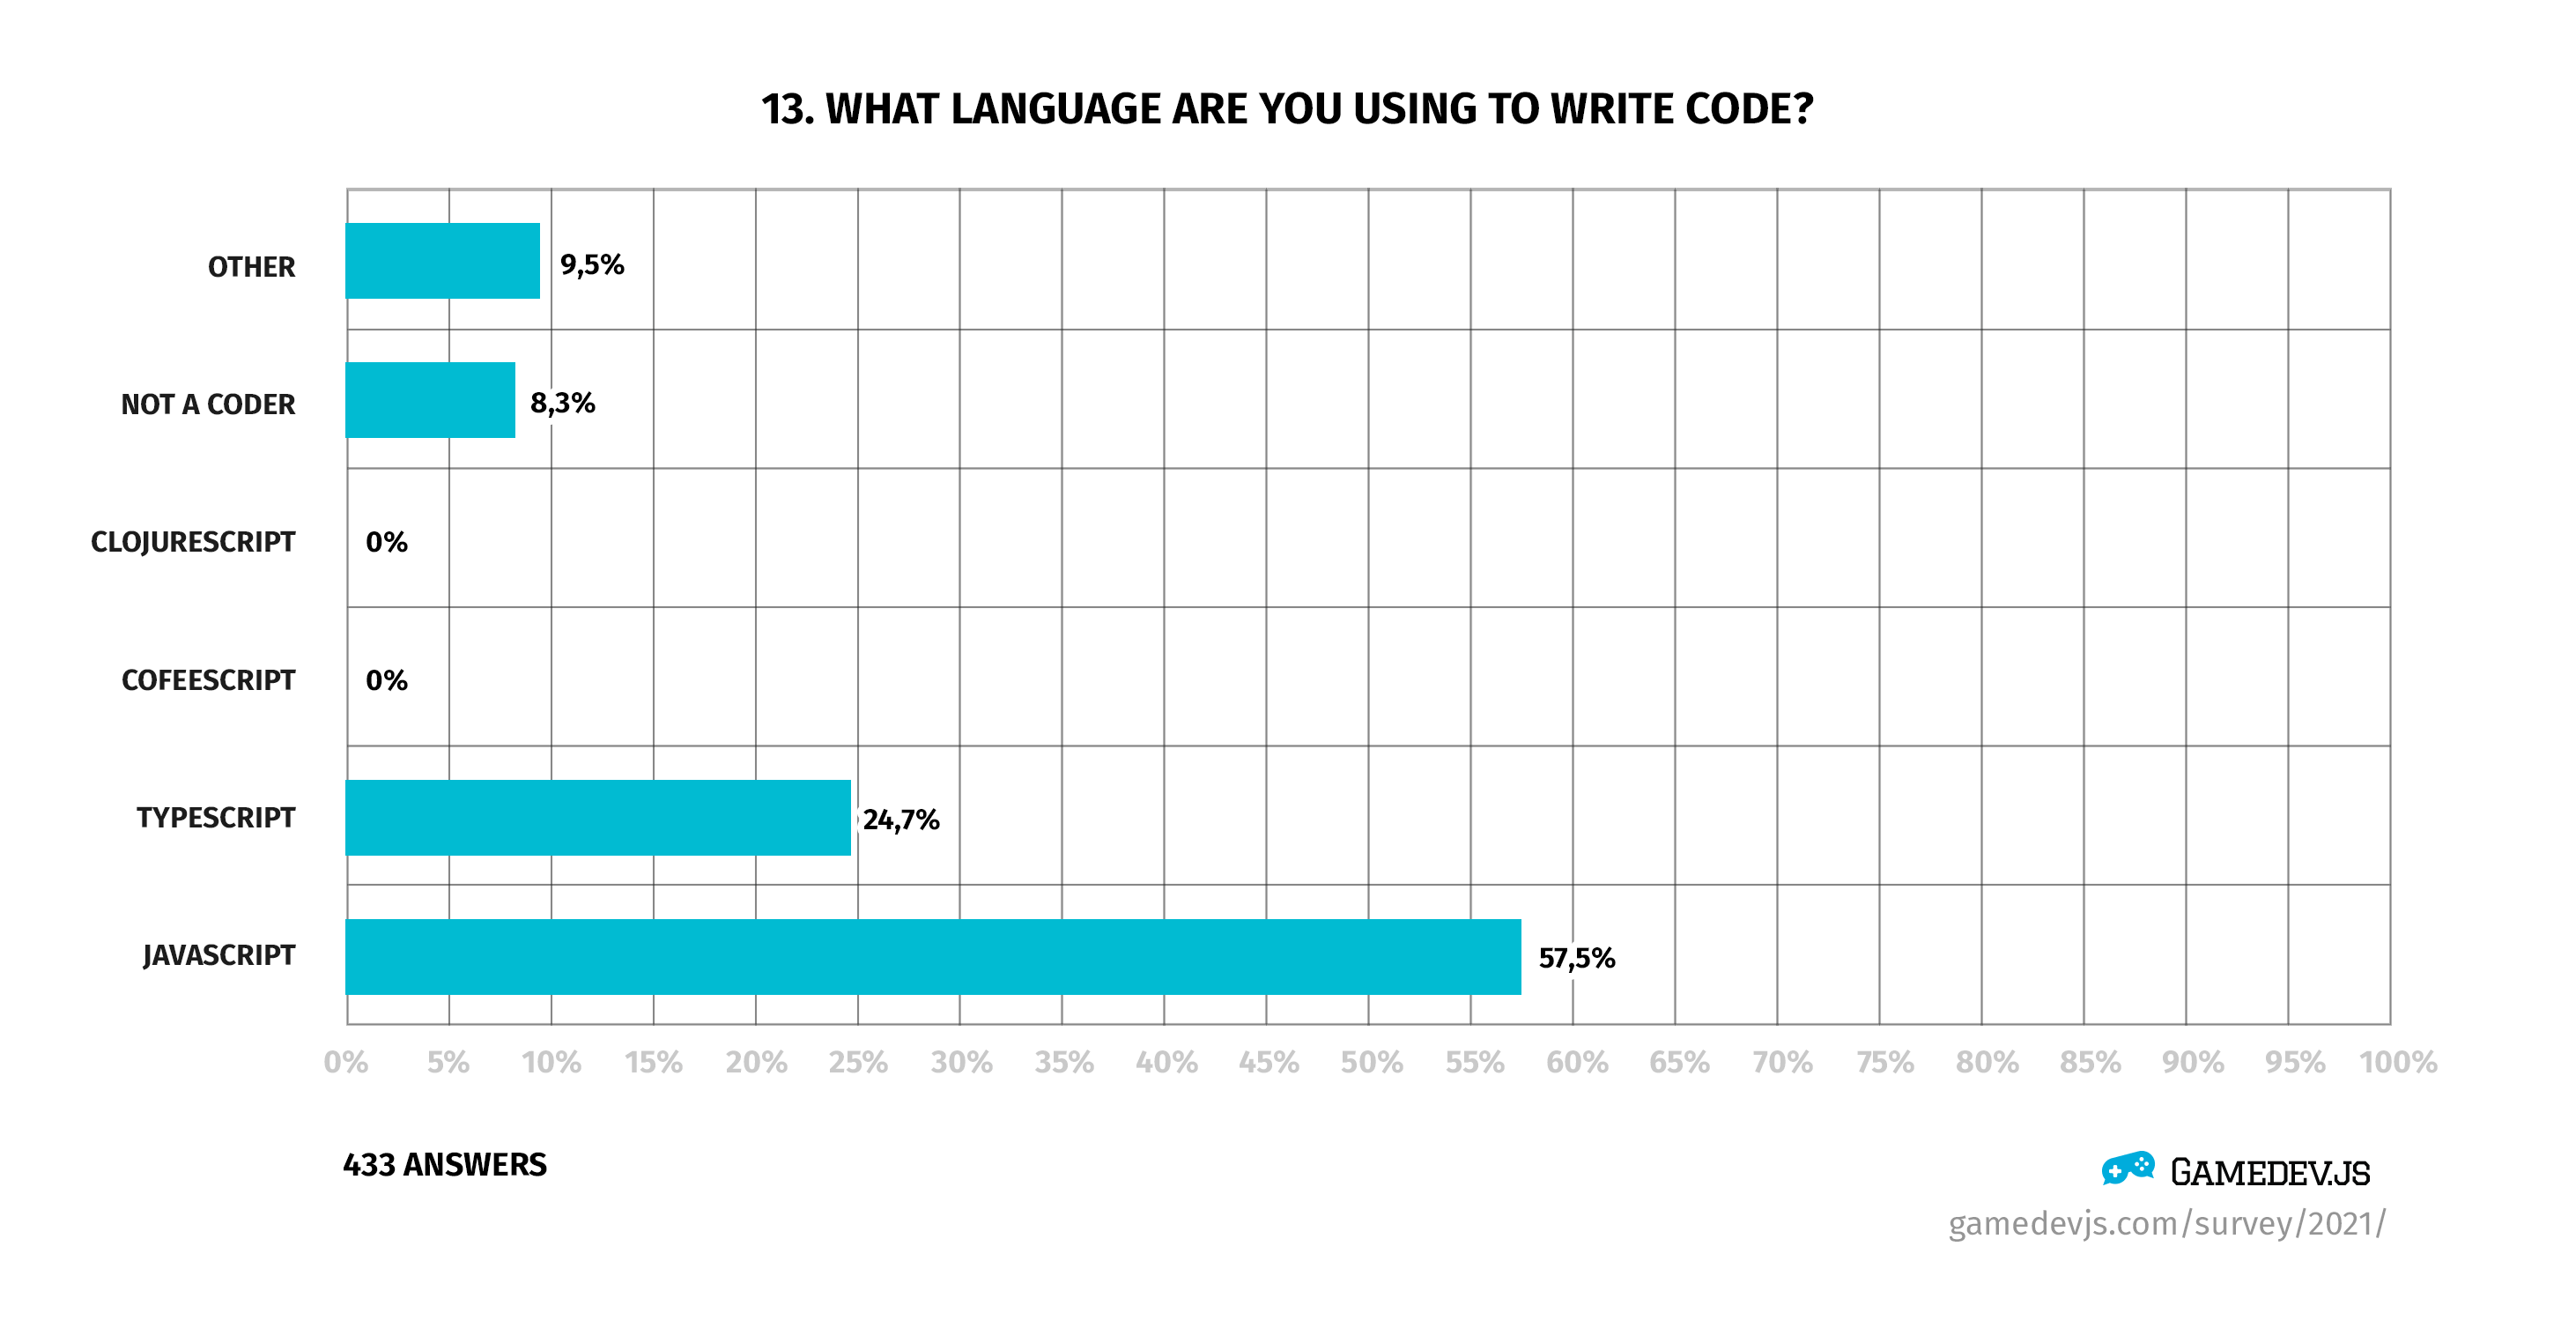 Gamedev.js Survey 2021 - Question #13: What language are you using to write code?